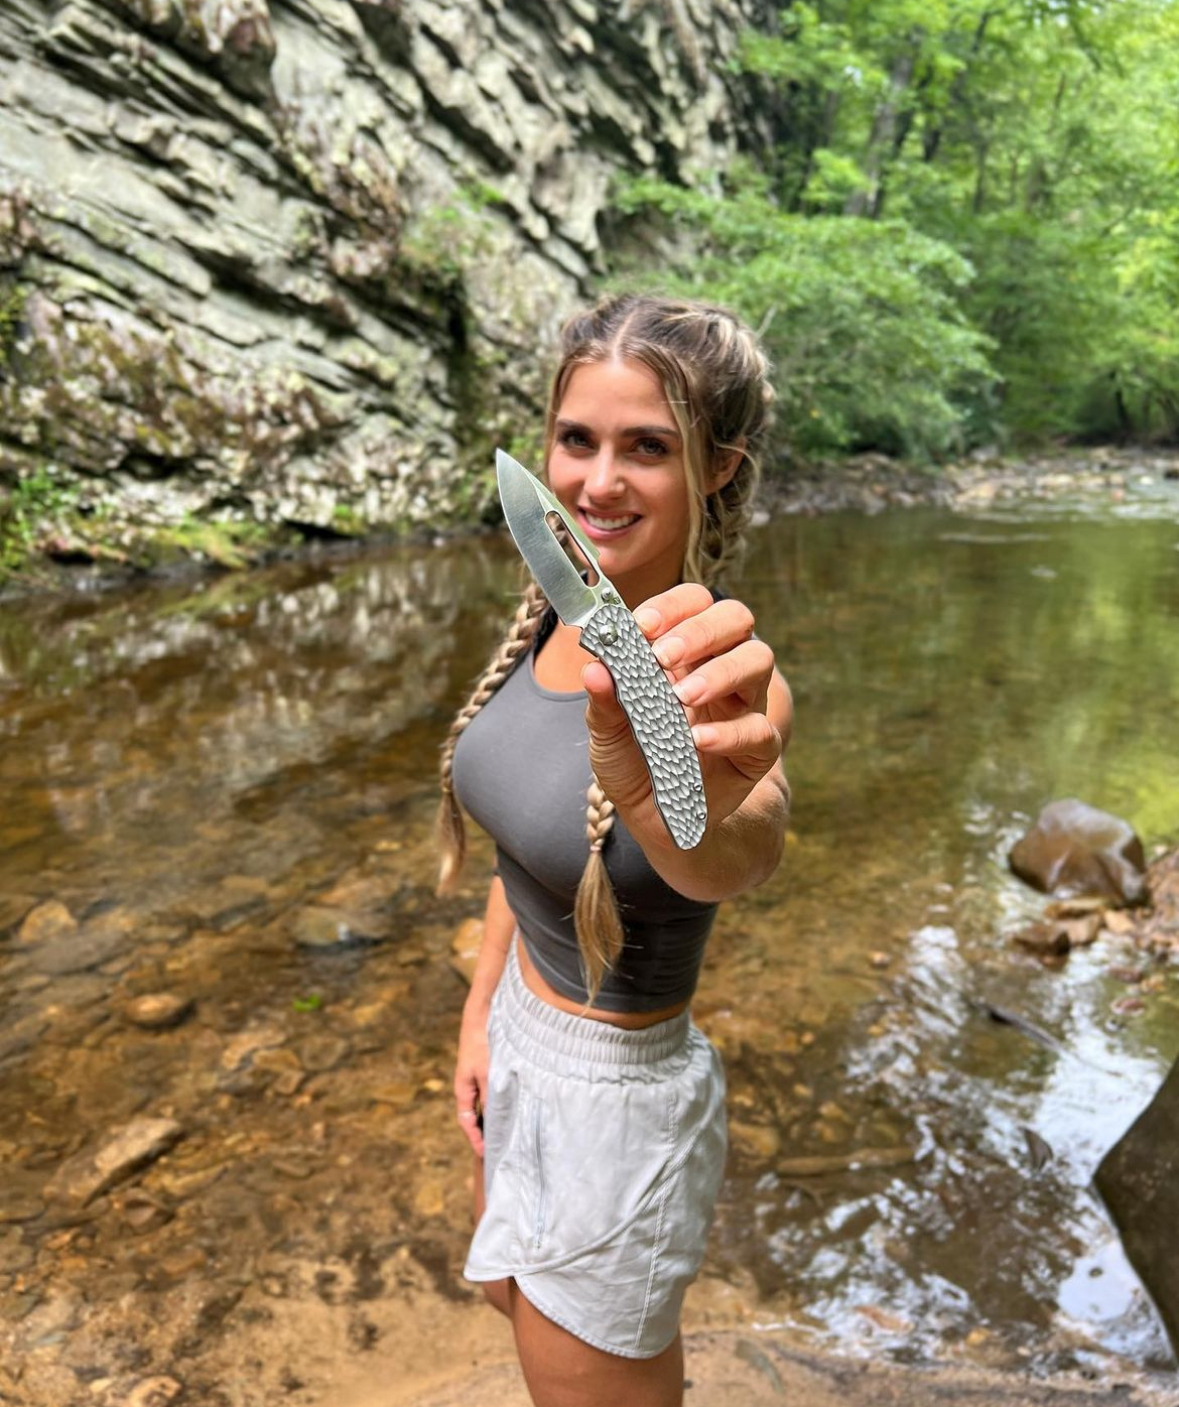 Discovery Channel’s Naked and Afraid reality TV star and outdoor survivalist Melissa Miller, aka Melissa Backwoods, will be a special celebrity guest at this year’s festival.